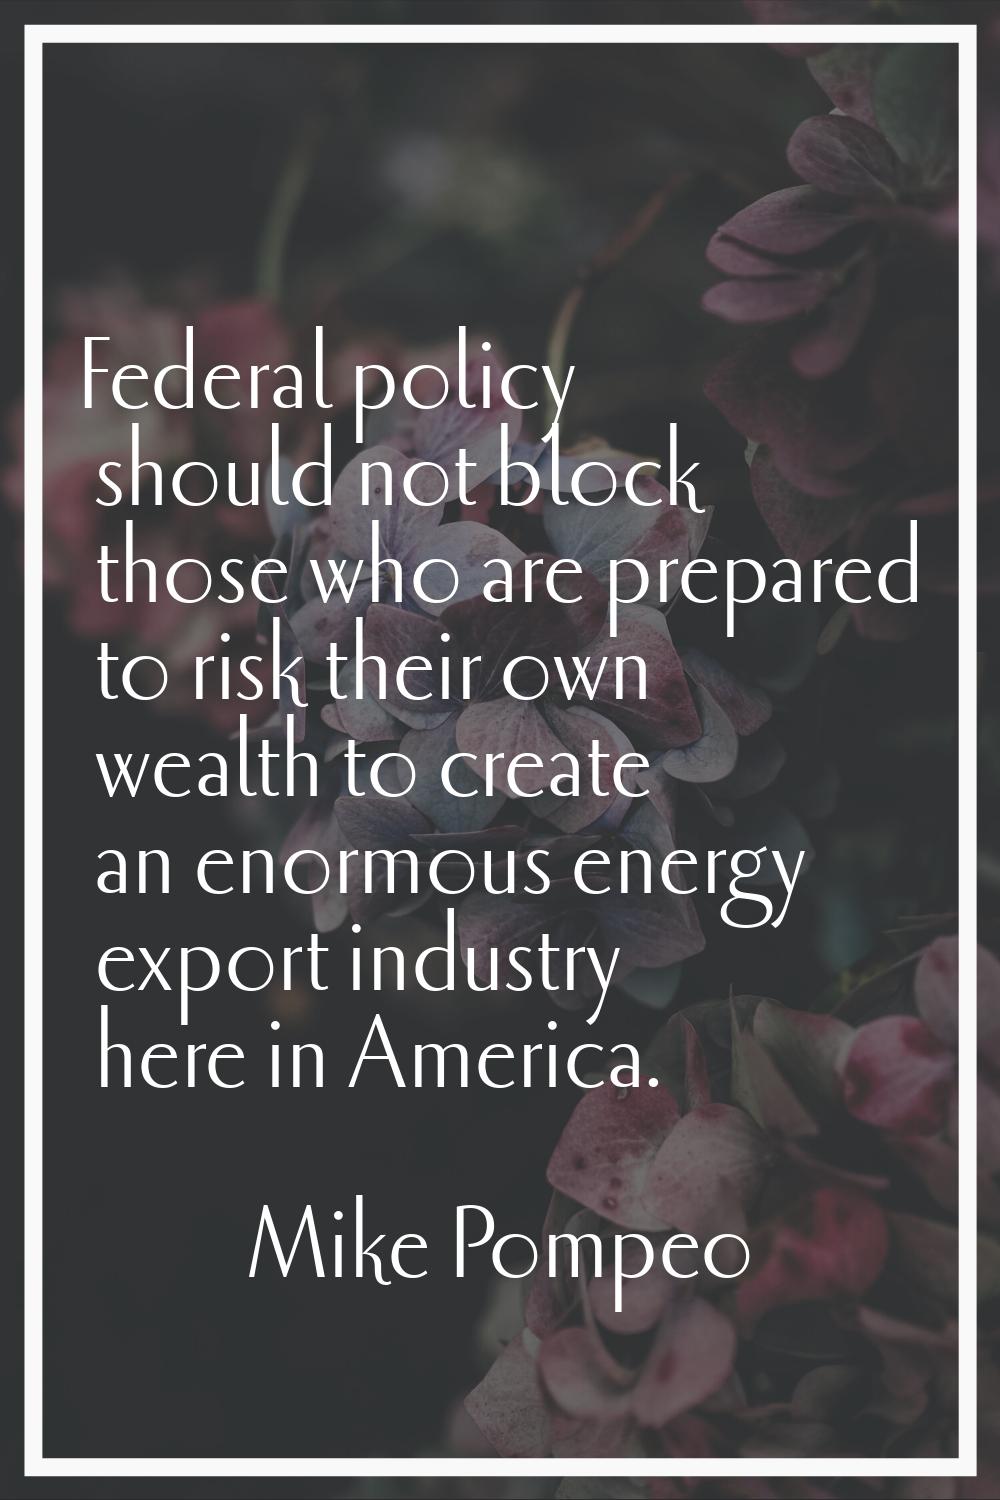 Federal policy should not block those who are prepared to risk their own wealth to create an enormo